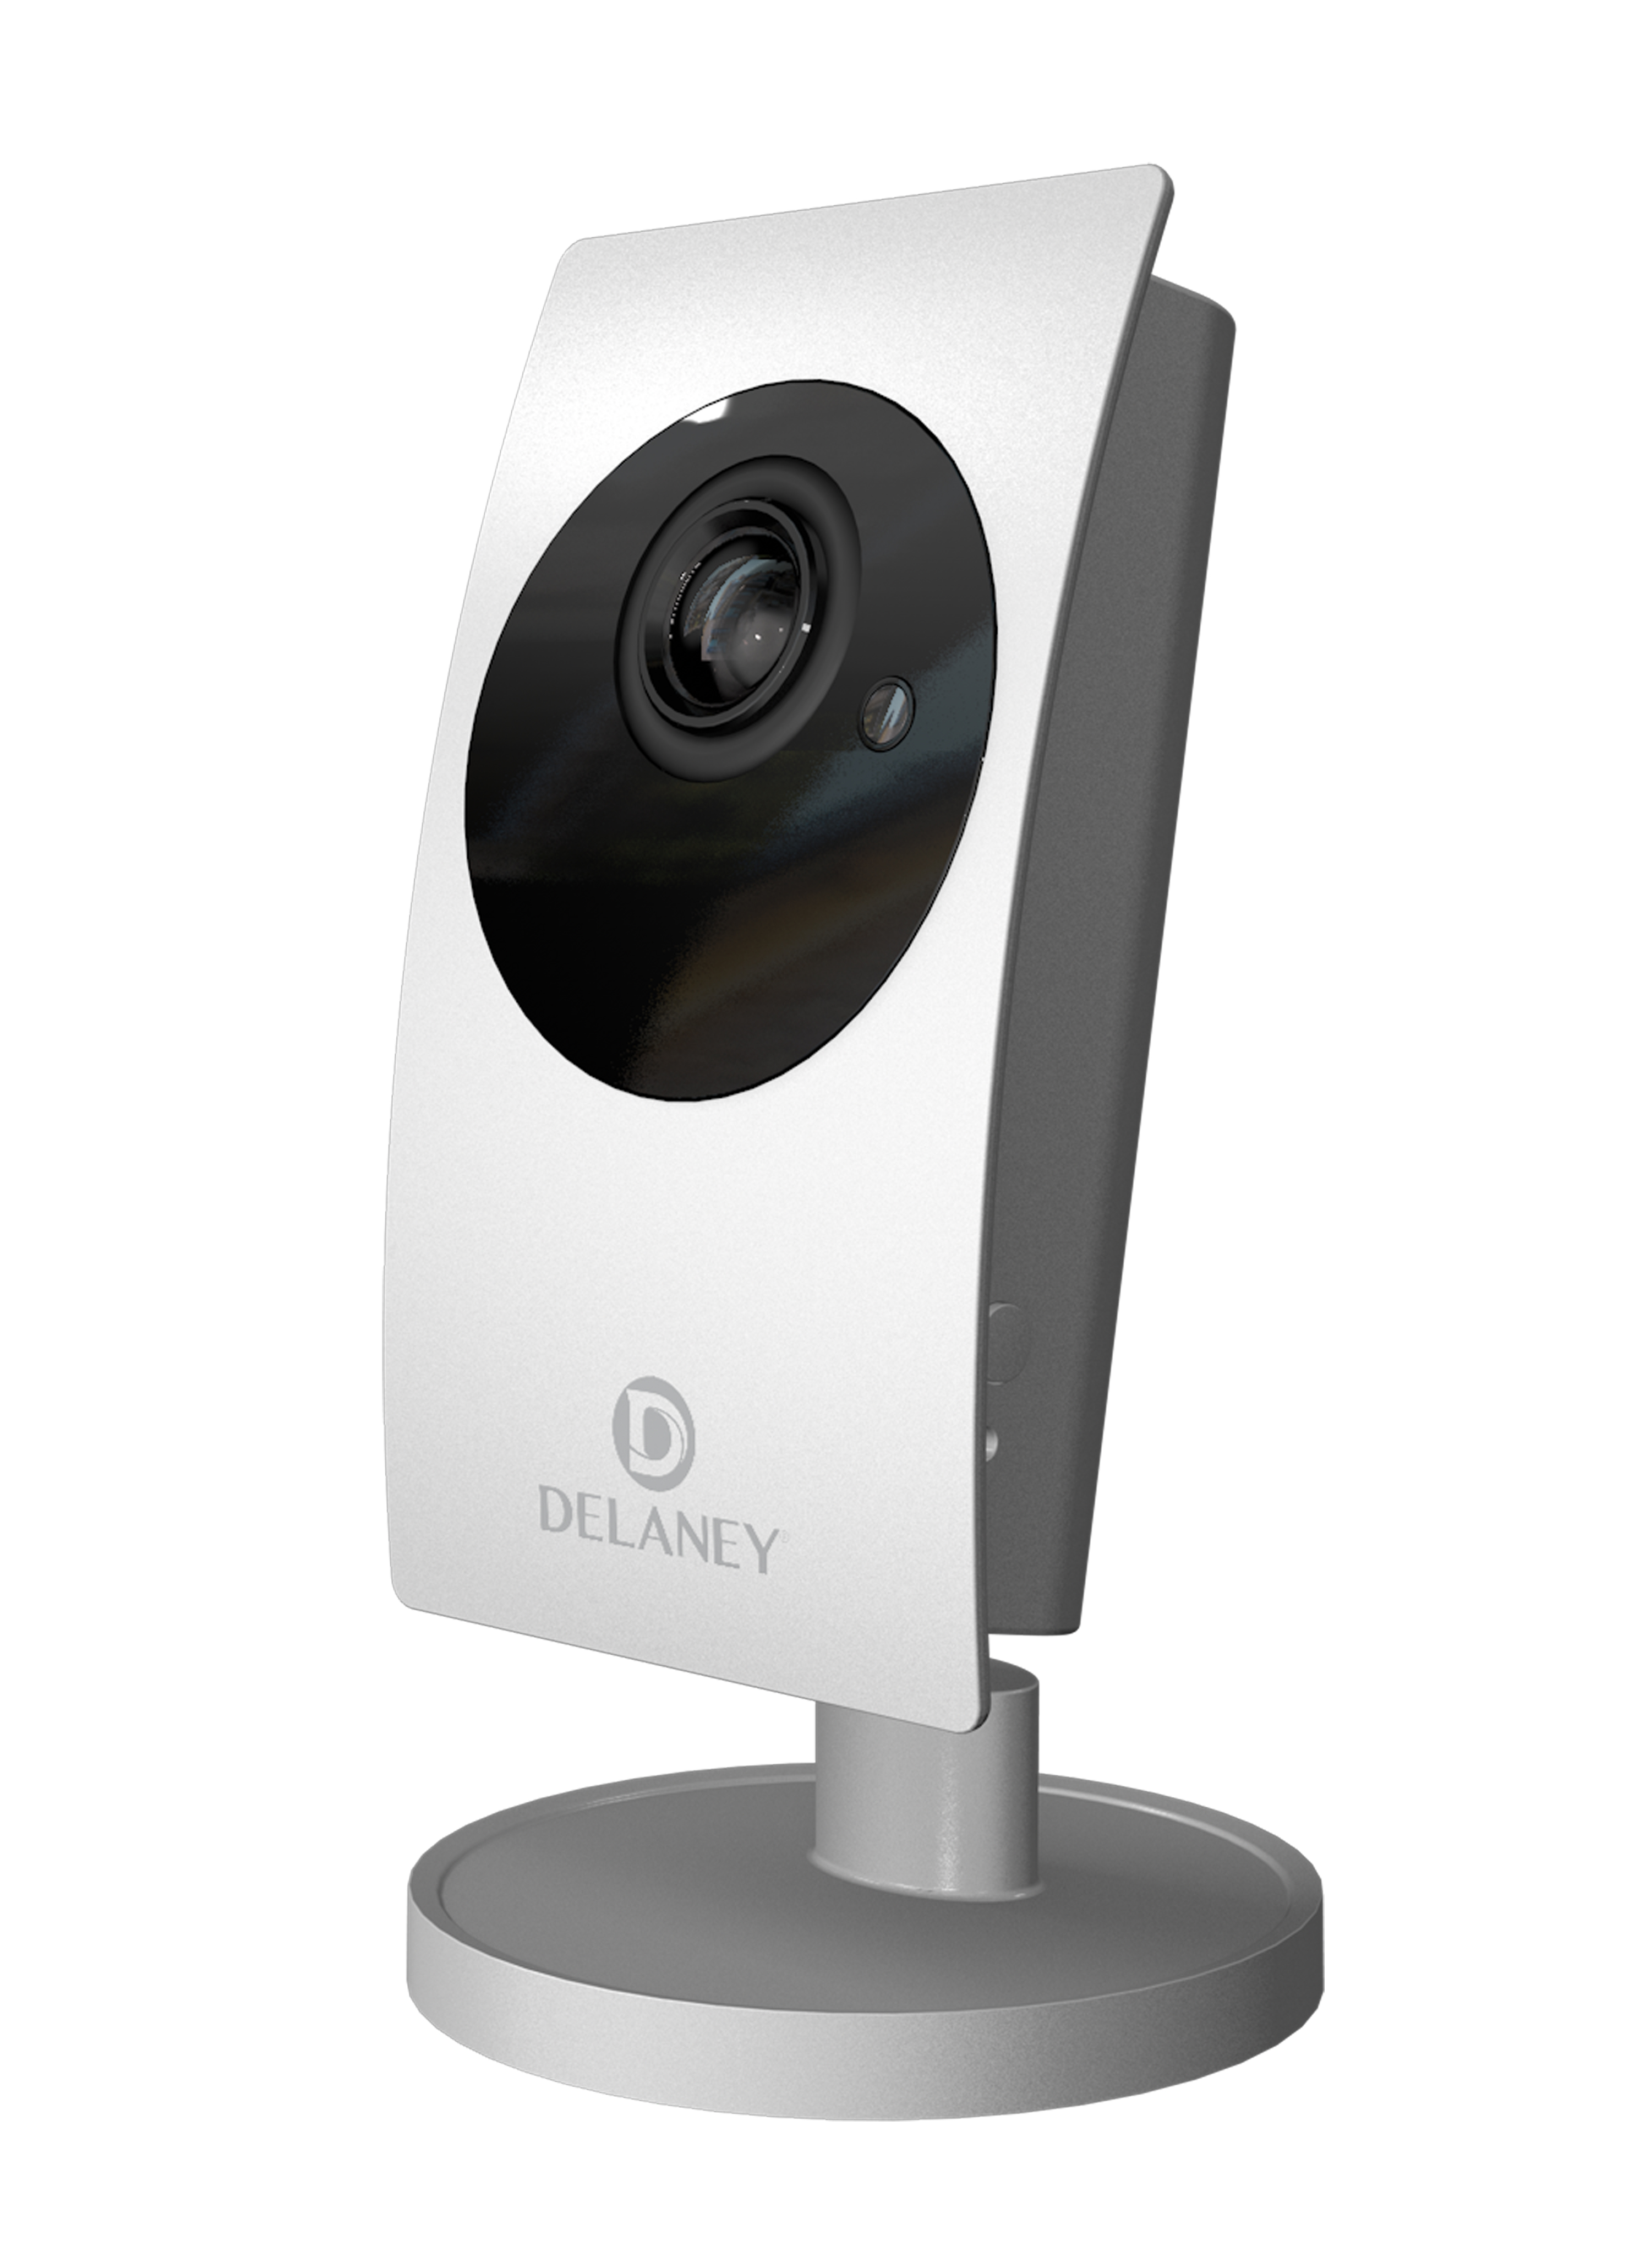 The Delaney Z-Wave Camera Bridge Hub acts as a bridge or gateway between a Smart Home App and Smart Home devices, and it's compatible with Amazon Alexa and Google Home.